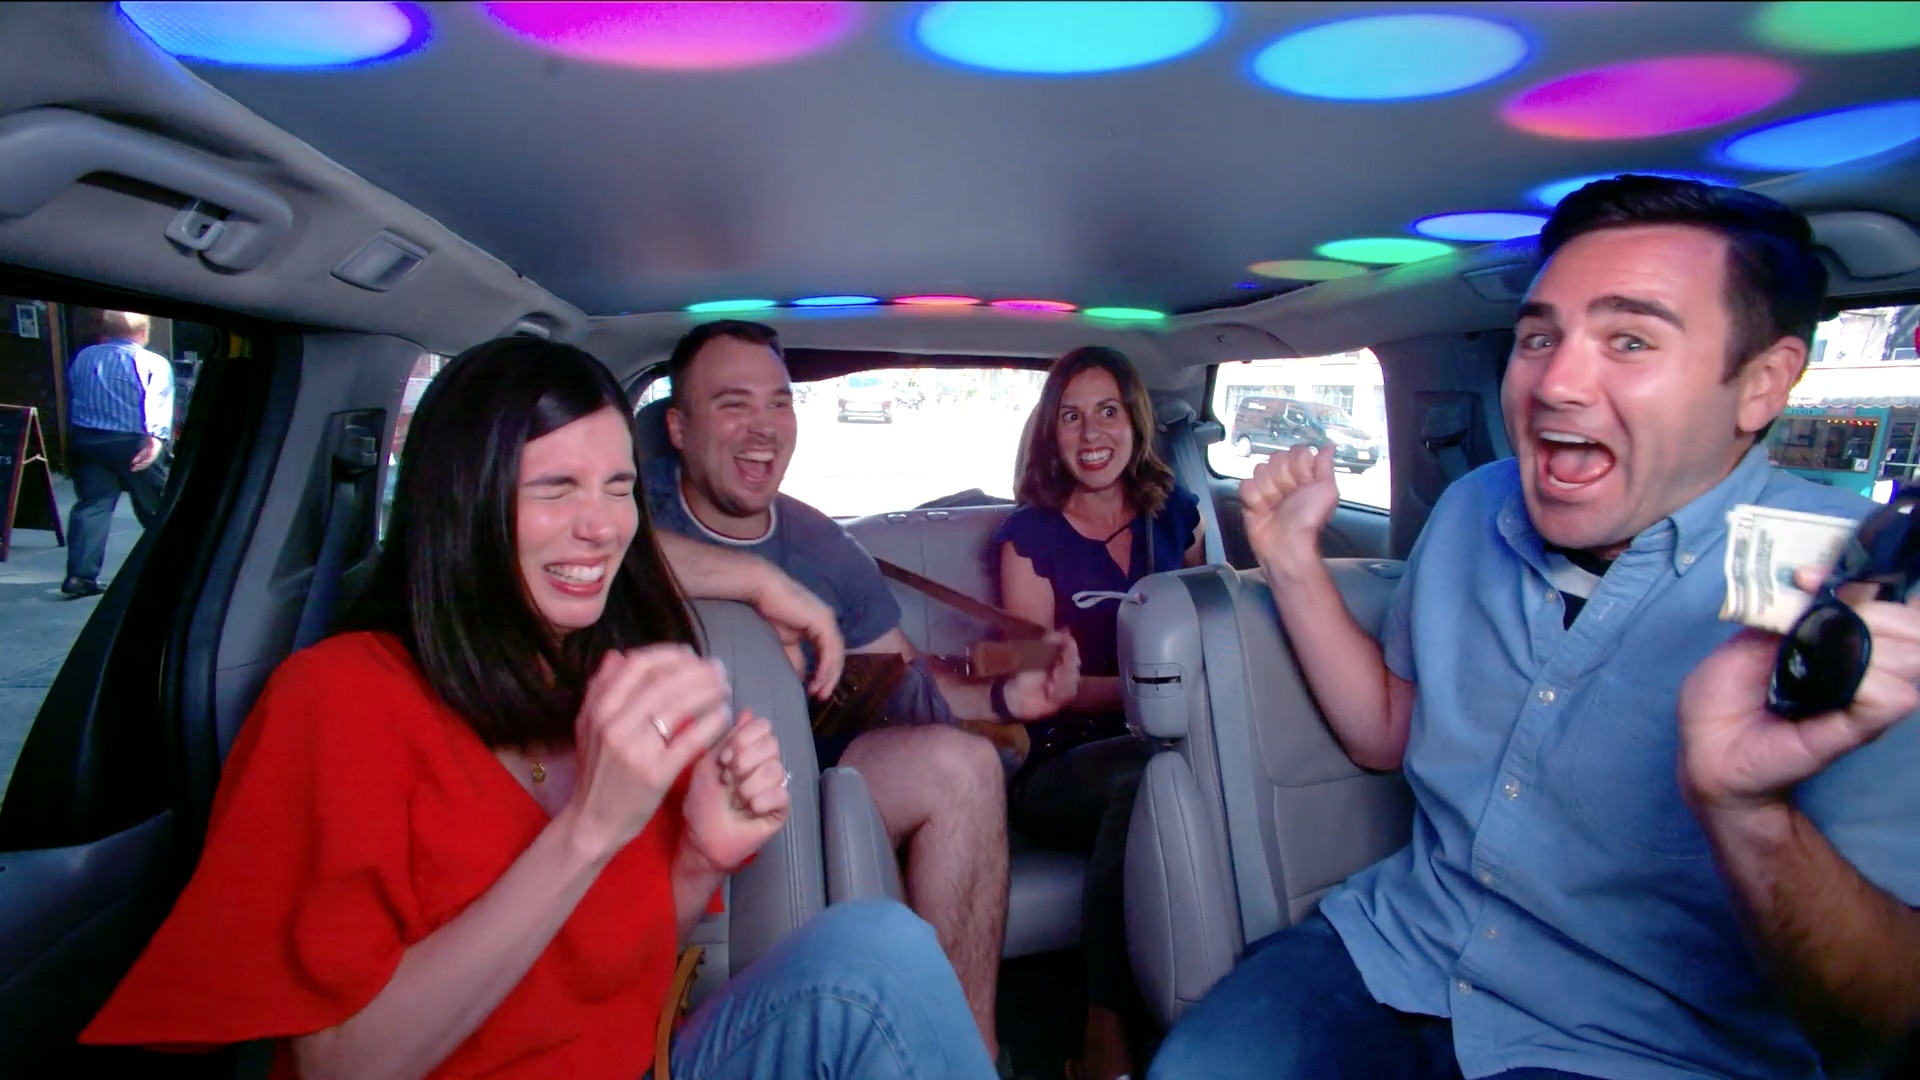 Your First Look At Bravo's Cash Cab!